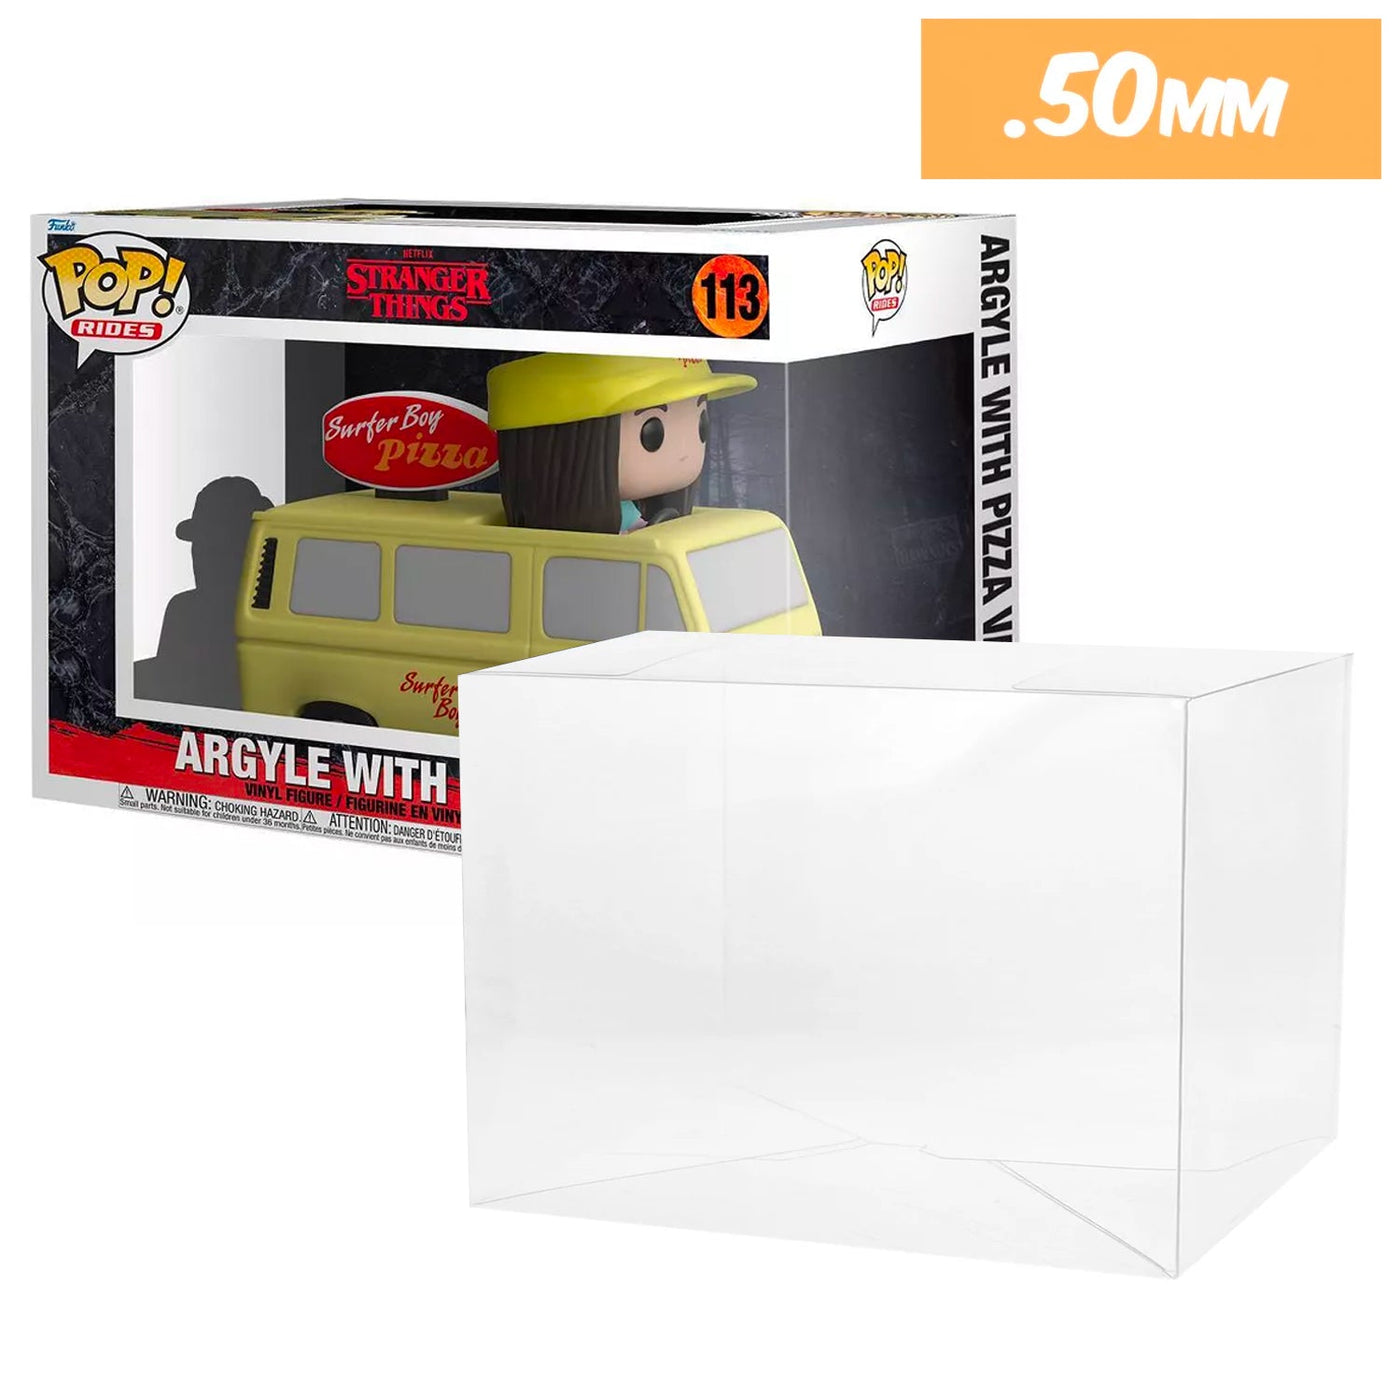 Funko POP! Ride Stranger Things Argyle with Pizza Van #113 Pop Protector Size CONFIRMED!